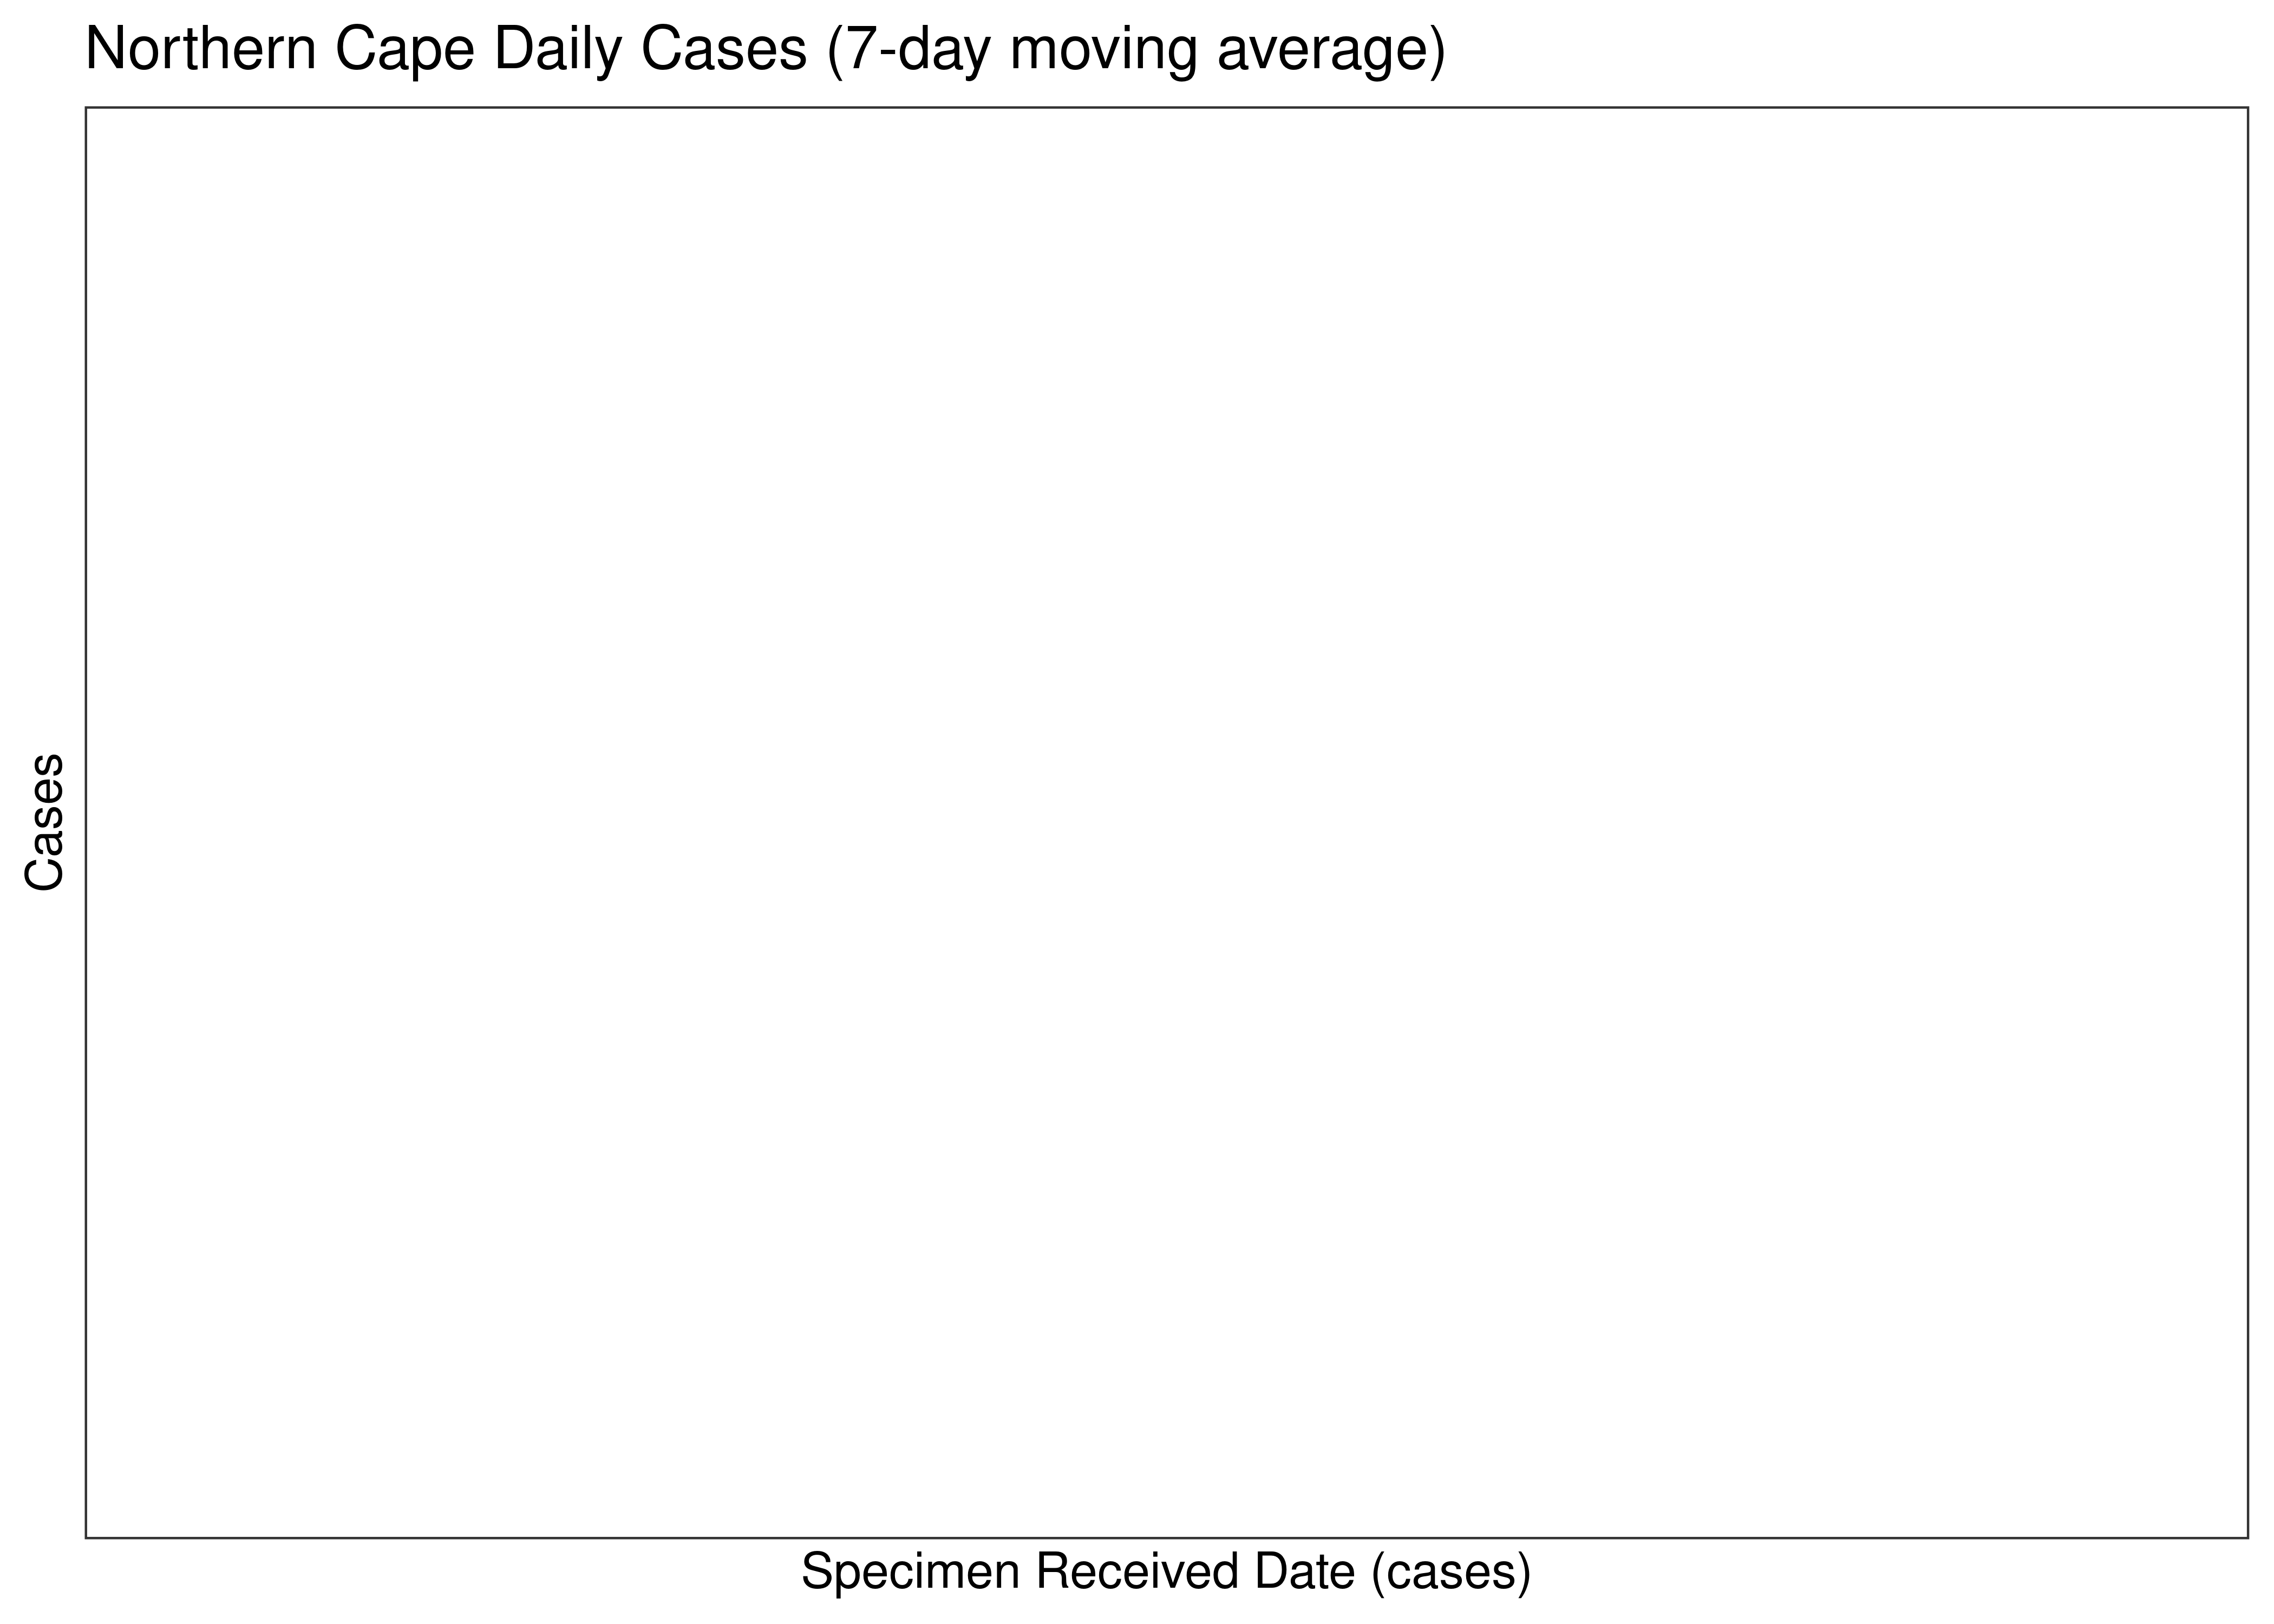 Northern Cape Daily Cases for Last 30-days (7-day moving average)